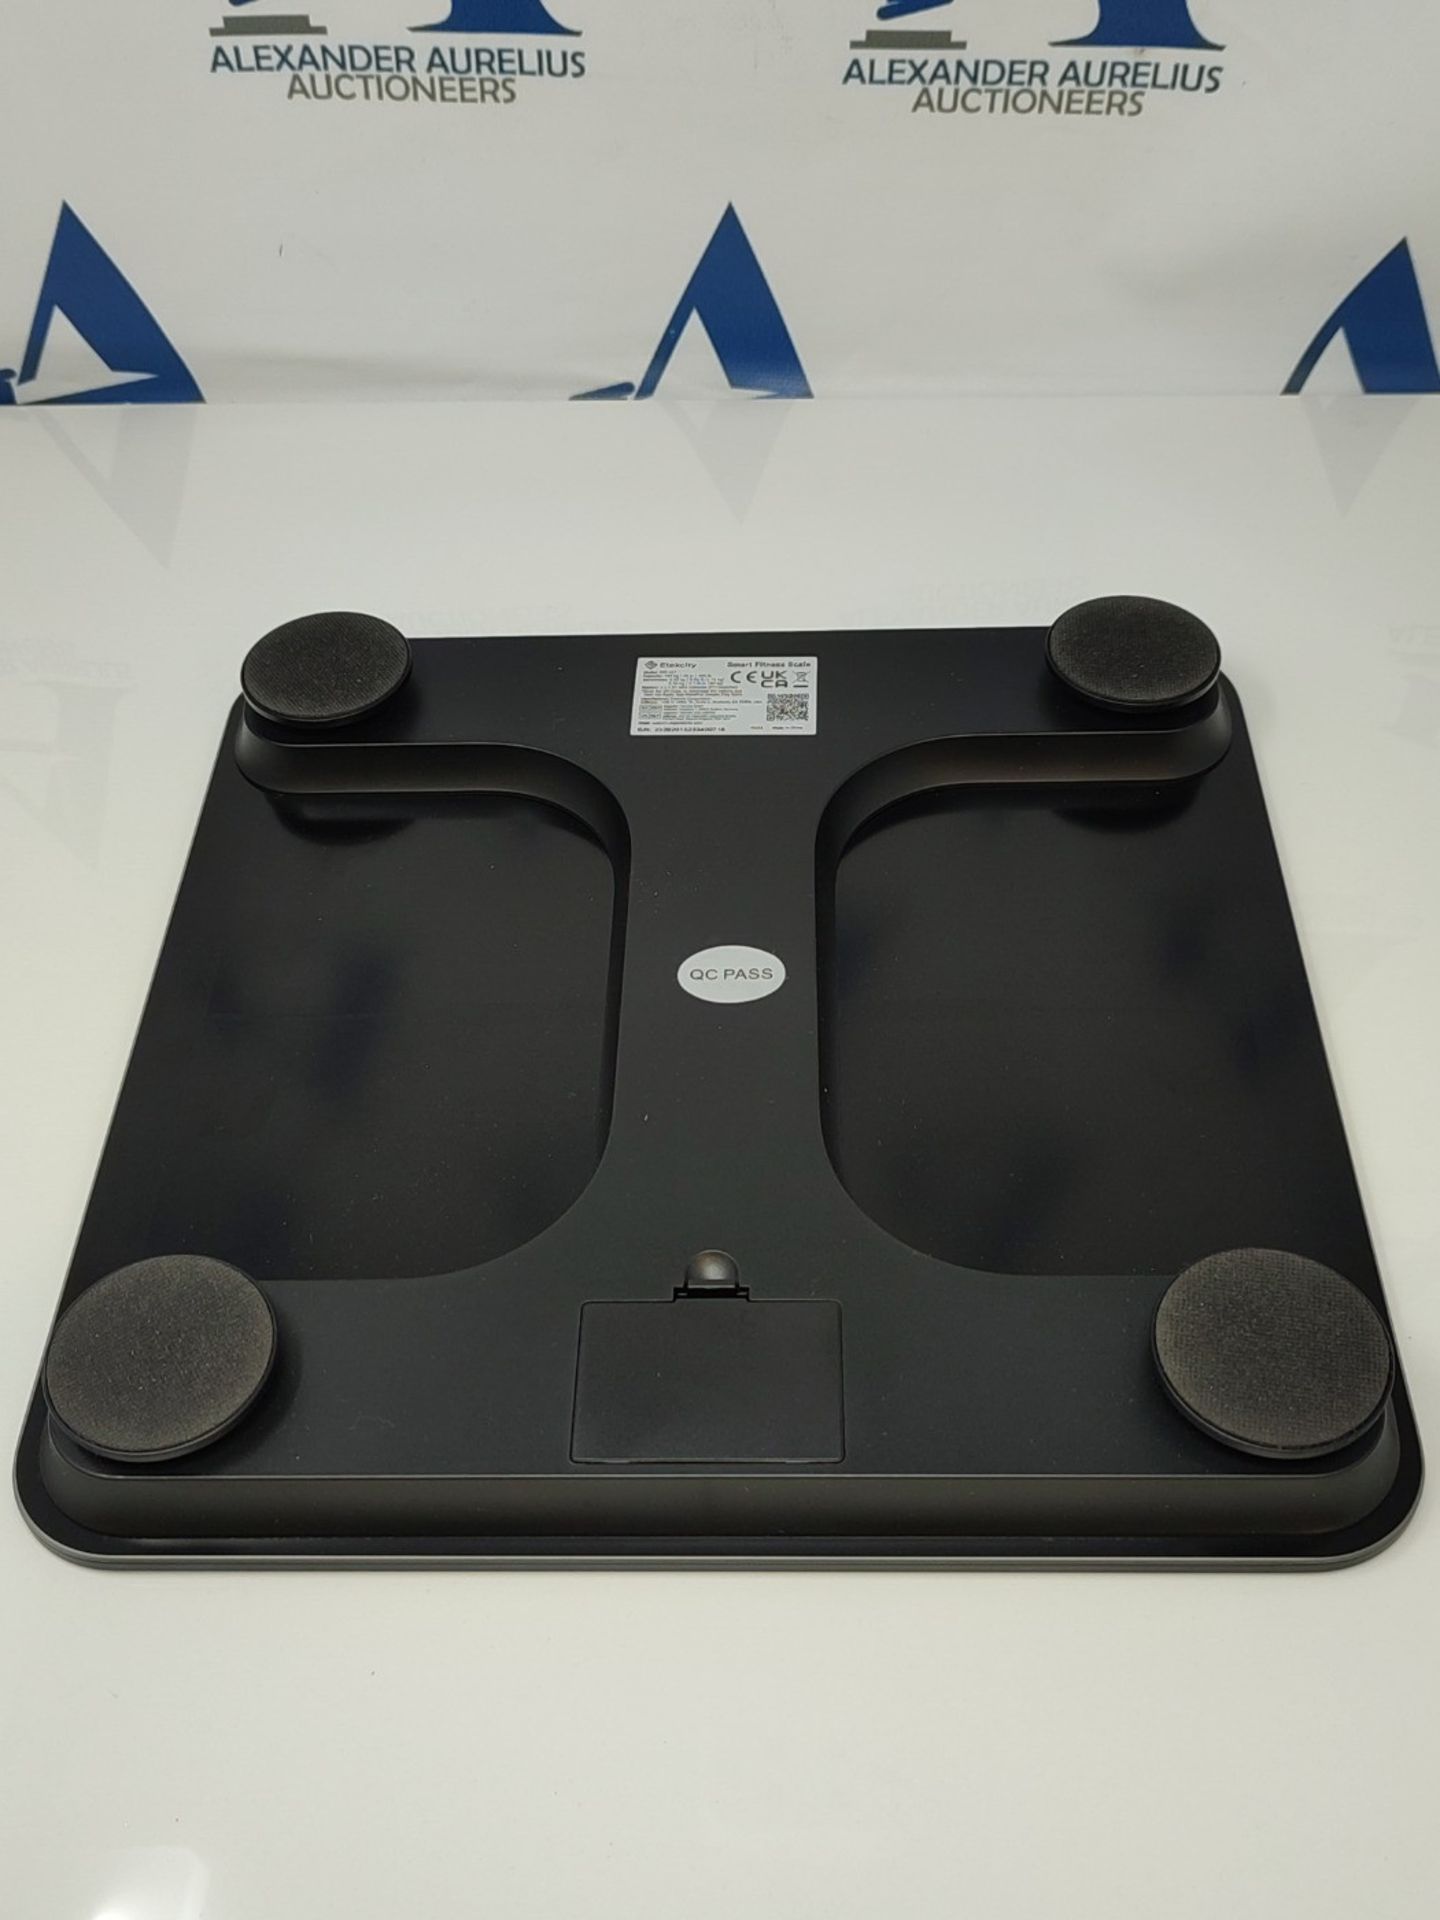 Etekcity Smart Bathroom Scales for Body Weight, Accurate to 0.05lb (0.02kg) Digital We - Image 3 of 3